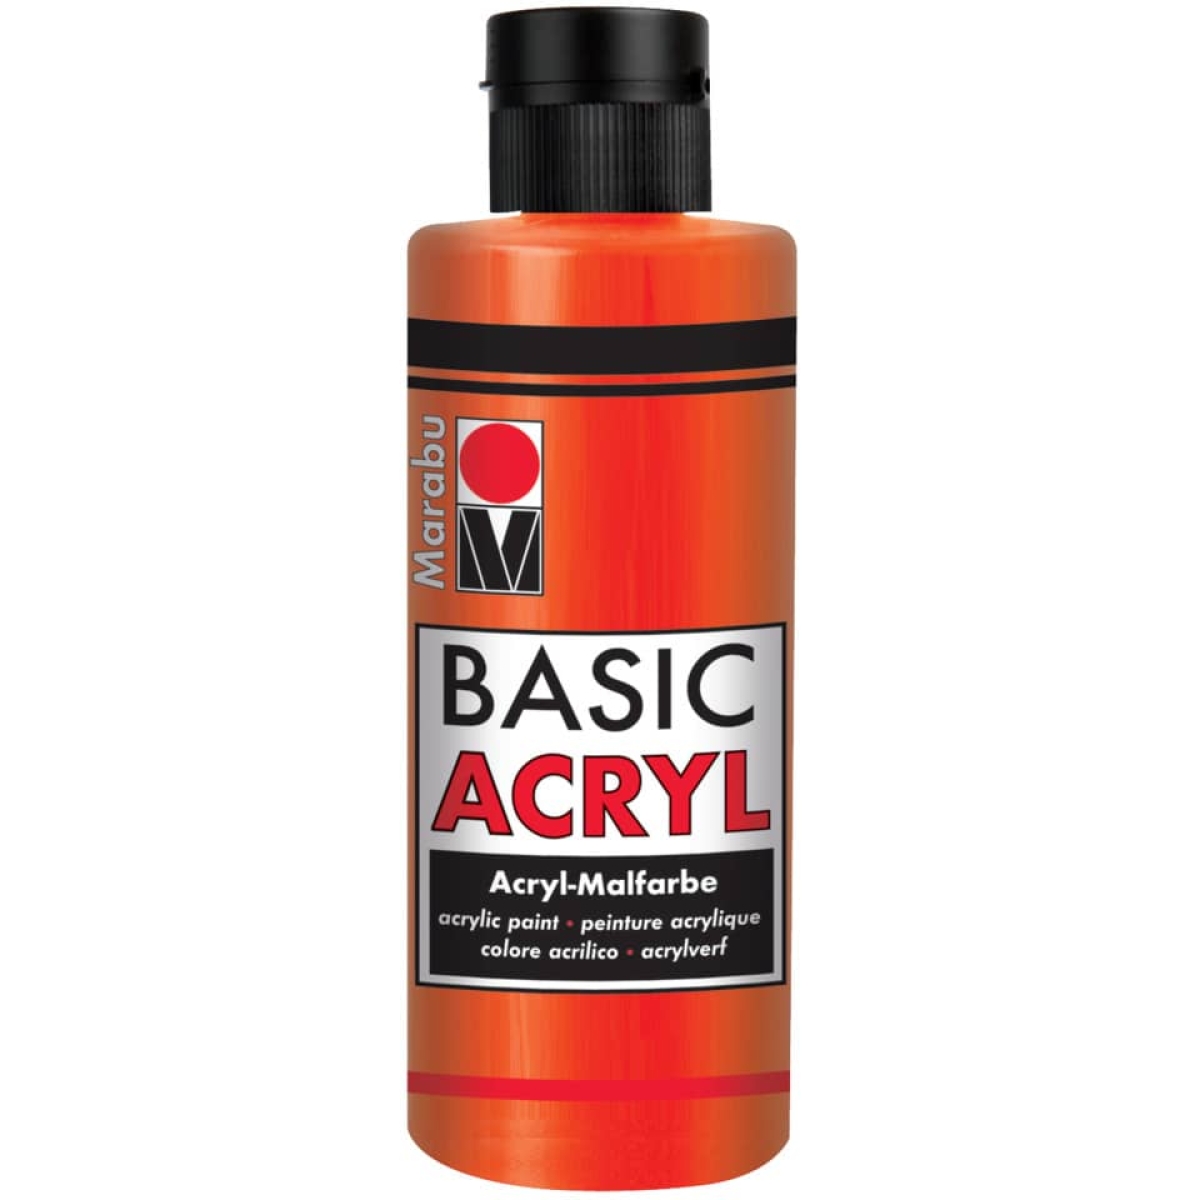 MARABUBasic acrylic paint, 80ml, vermilion red 12000 004 030-Price for 0.0800 literArticle-No: 4007751115102